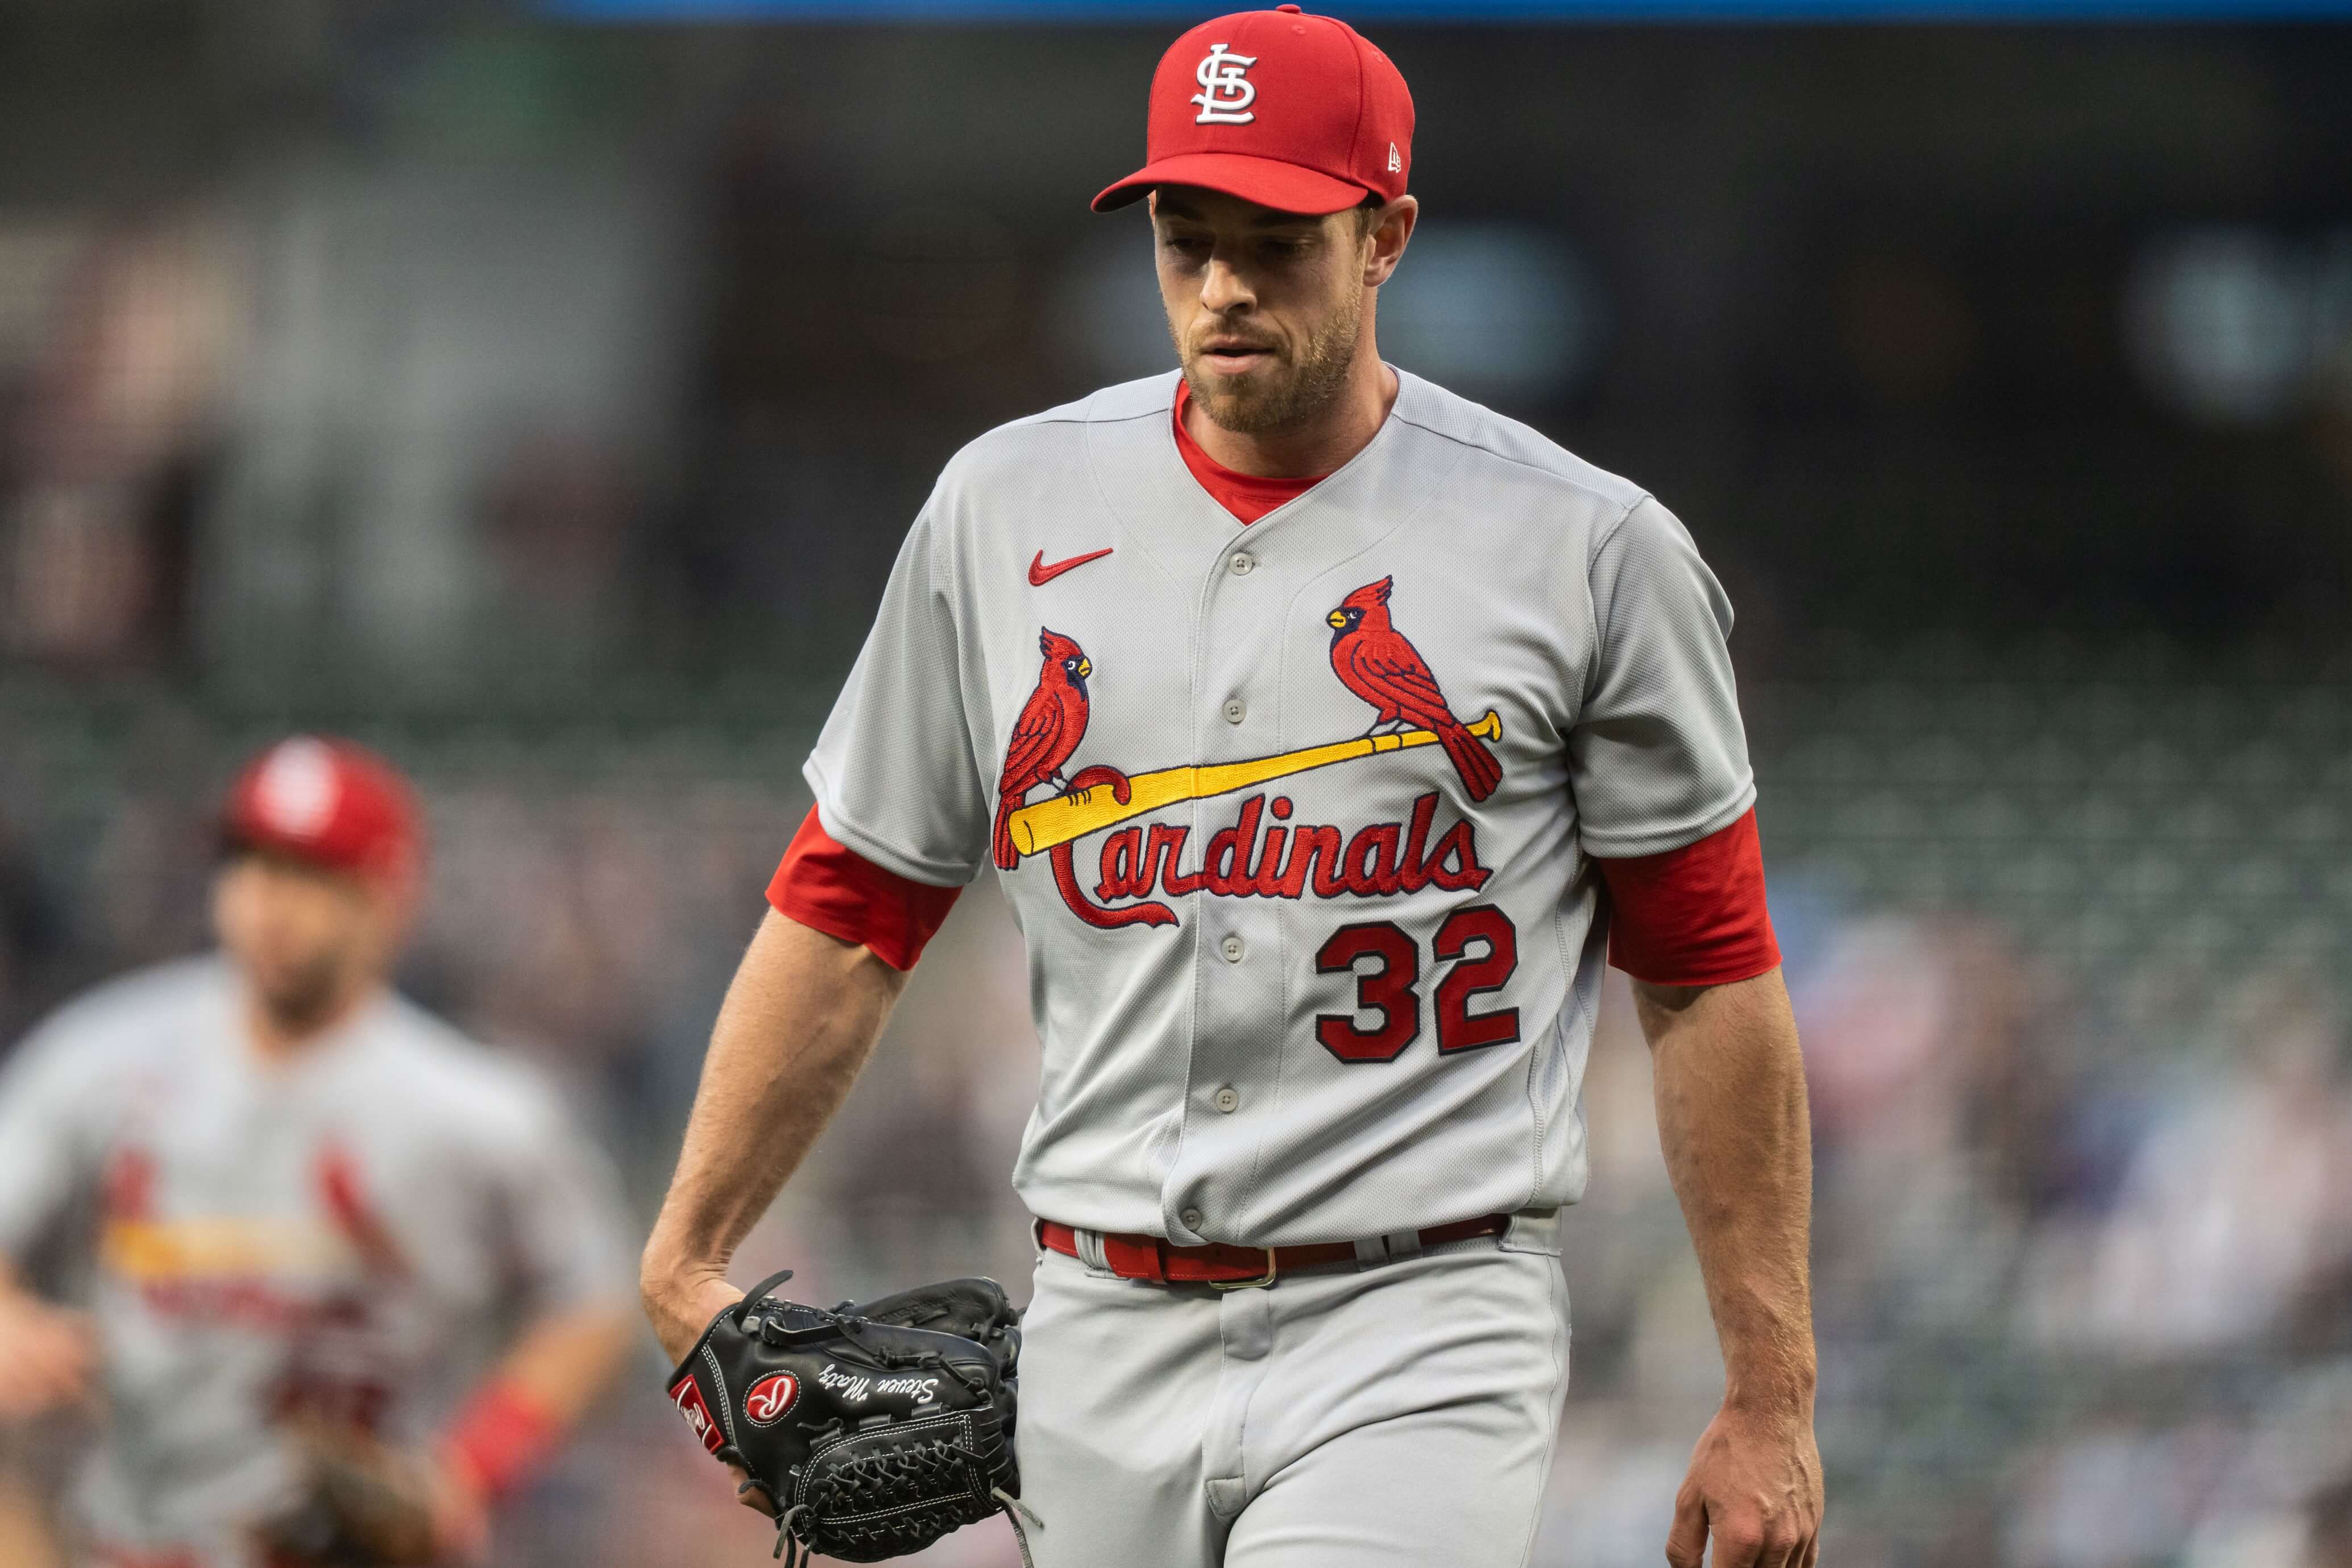 Cardinals vs. Dodgers: Odds, spread, over/under - May 21